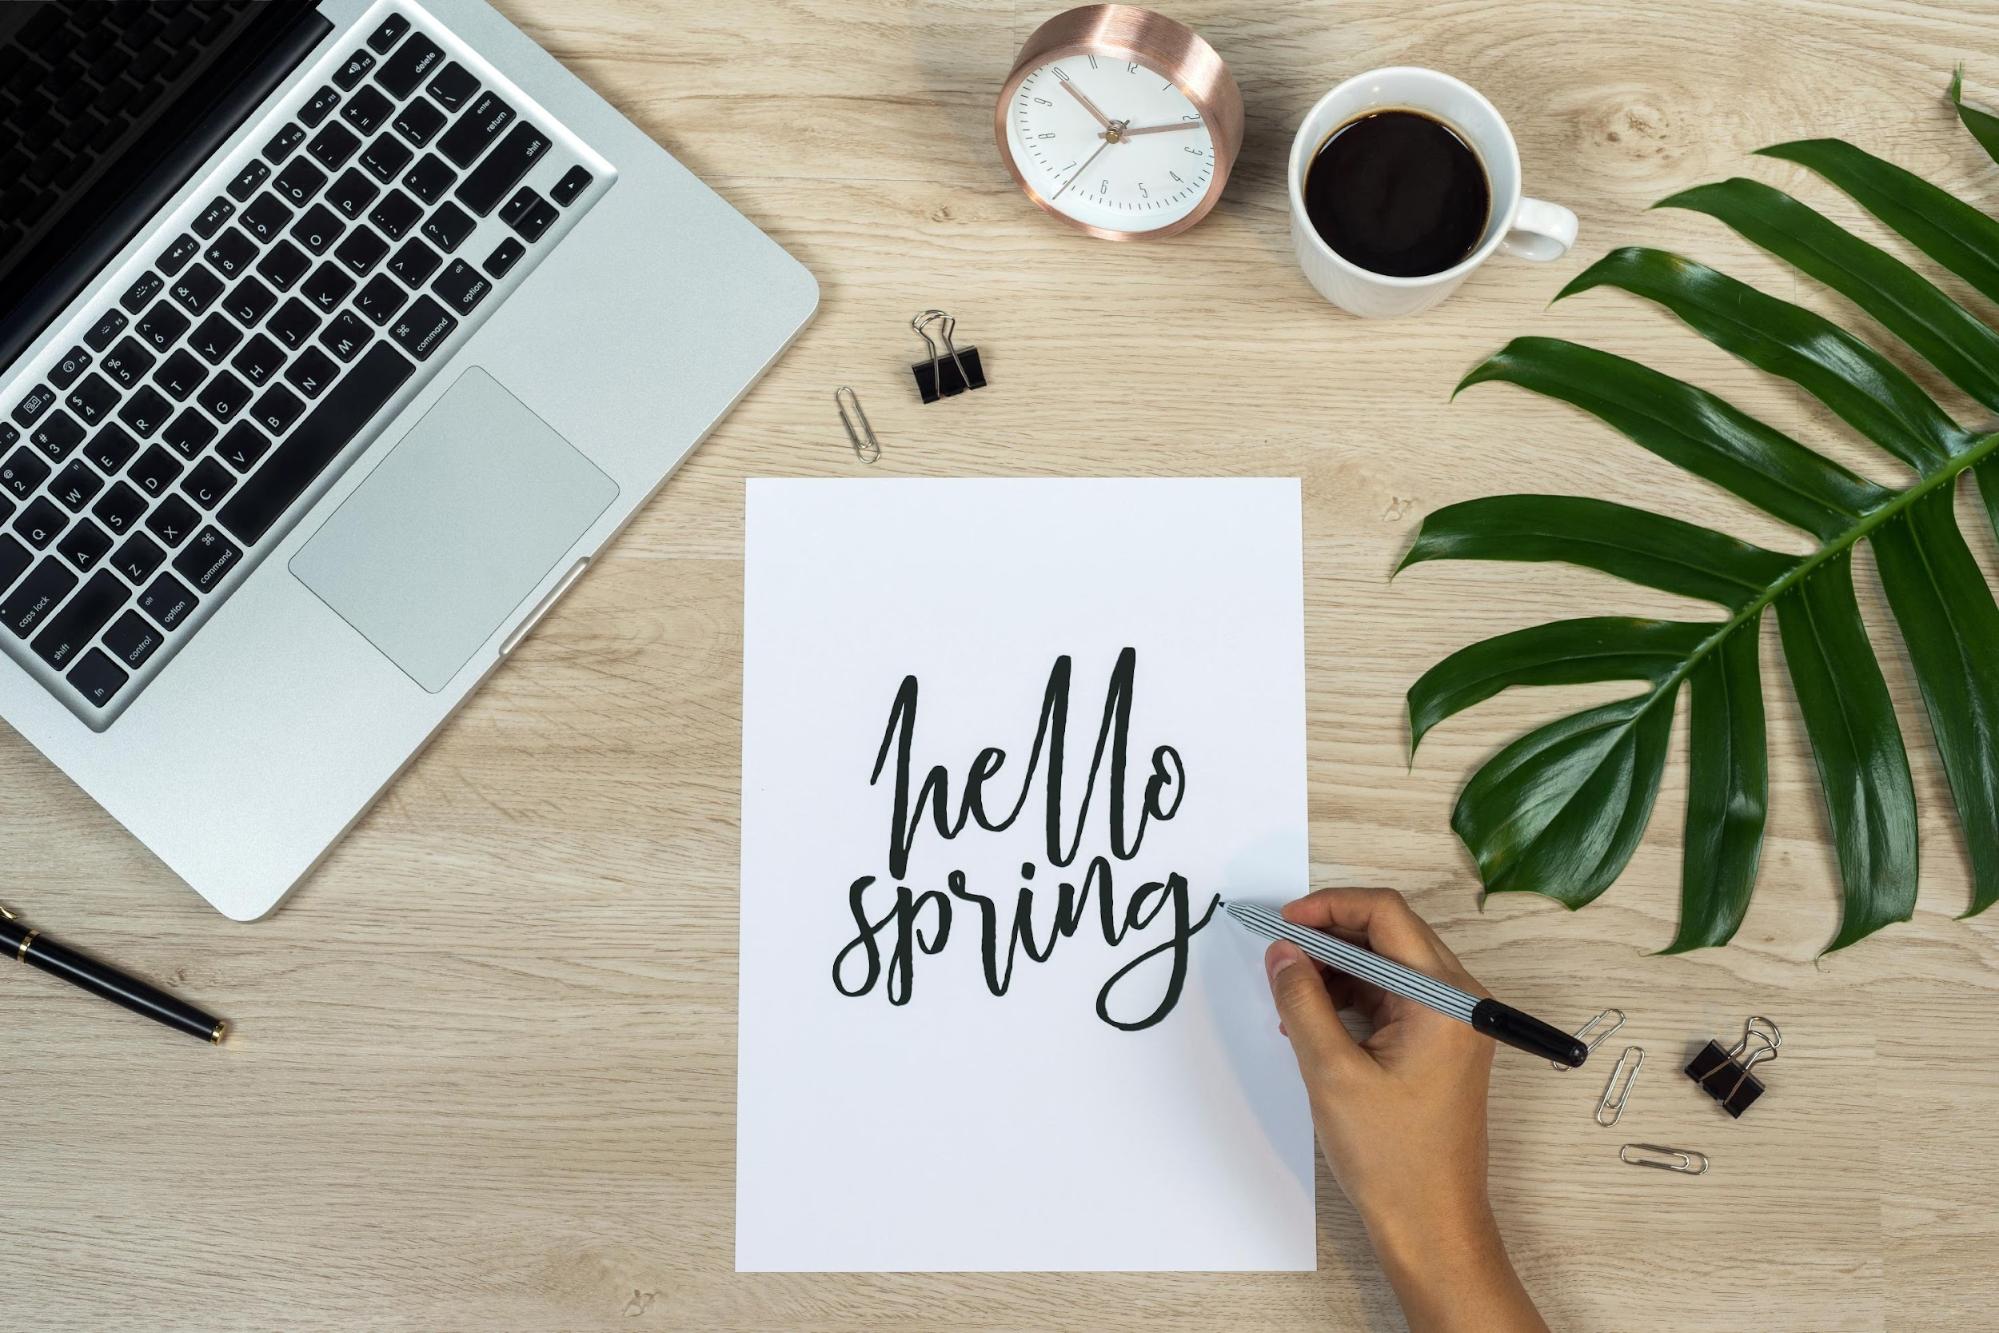 Conceptual Image of a Hand Writing “Hello Spring” on a Paper on a Desk with a Computer, Coffee, Clock, and Large Leaf